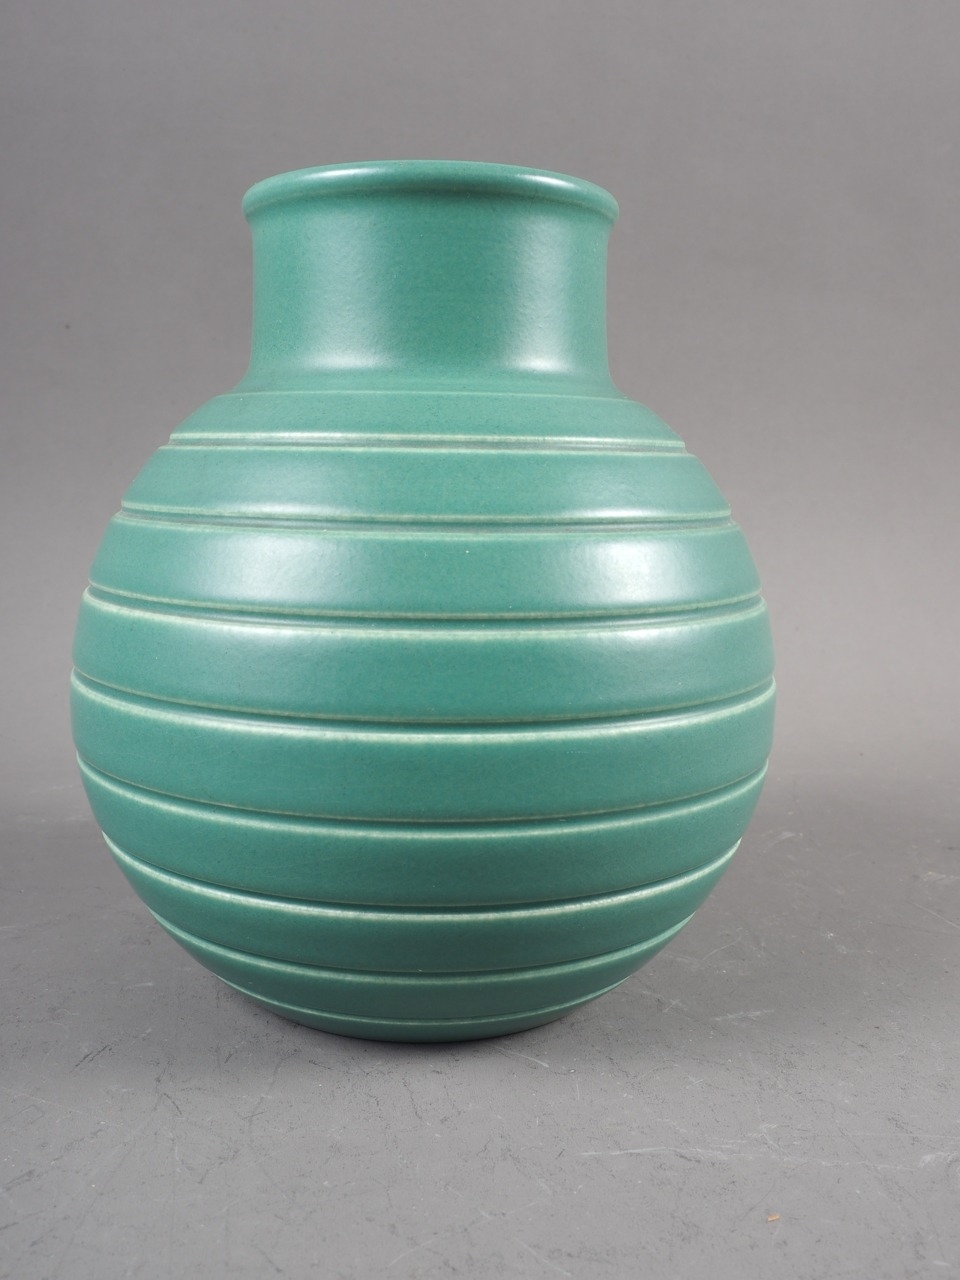 A Keith Murray Wedgwood bulbous green glazed vase with line design, 6 1/4" high, and three Keith - Image 4 of 6